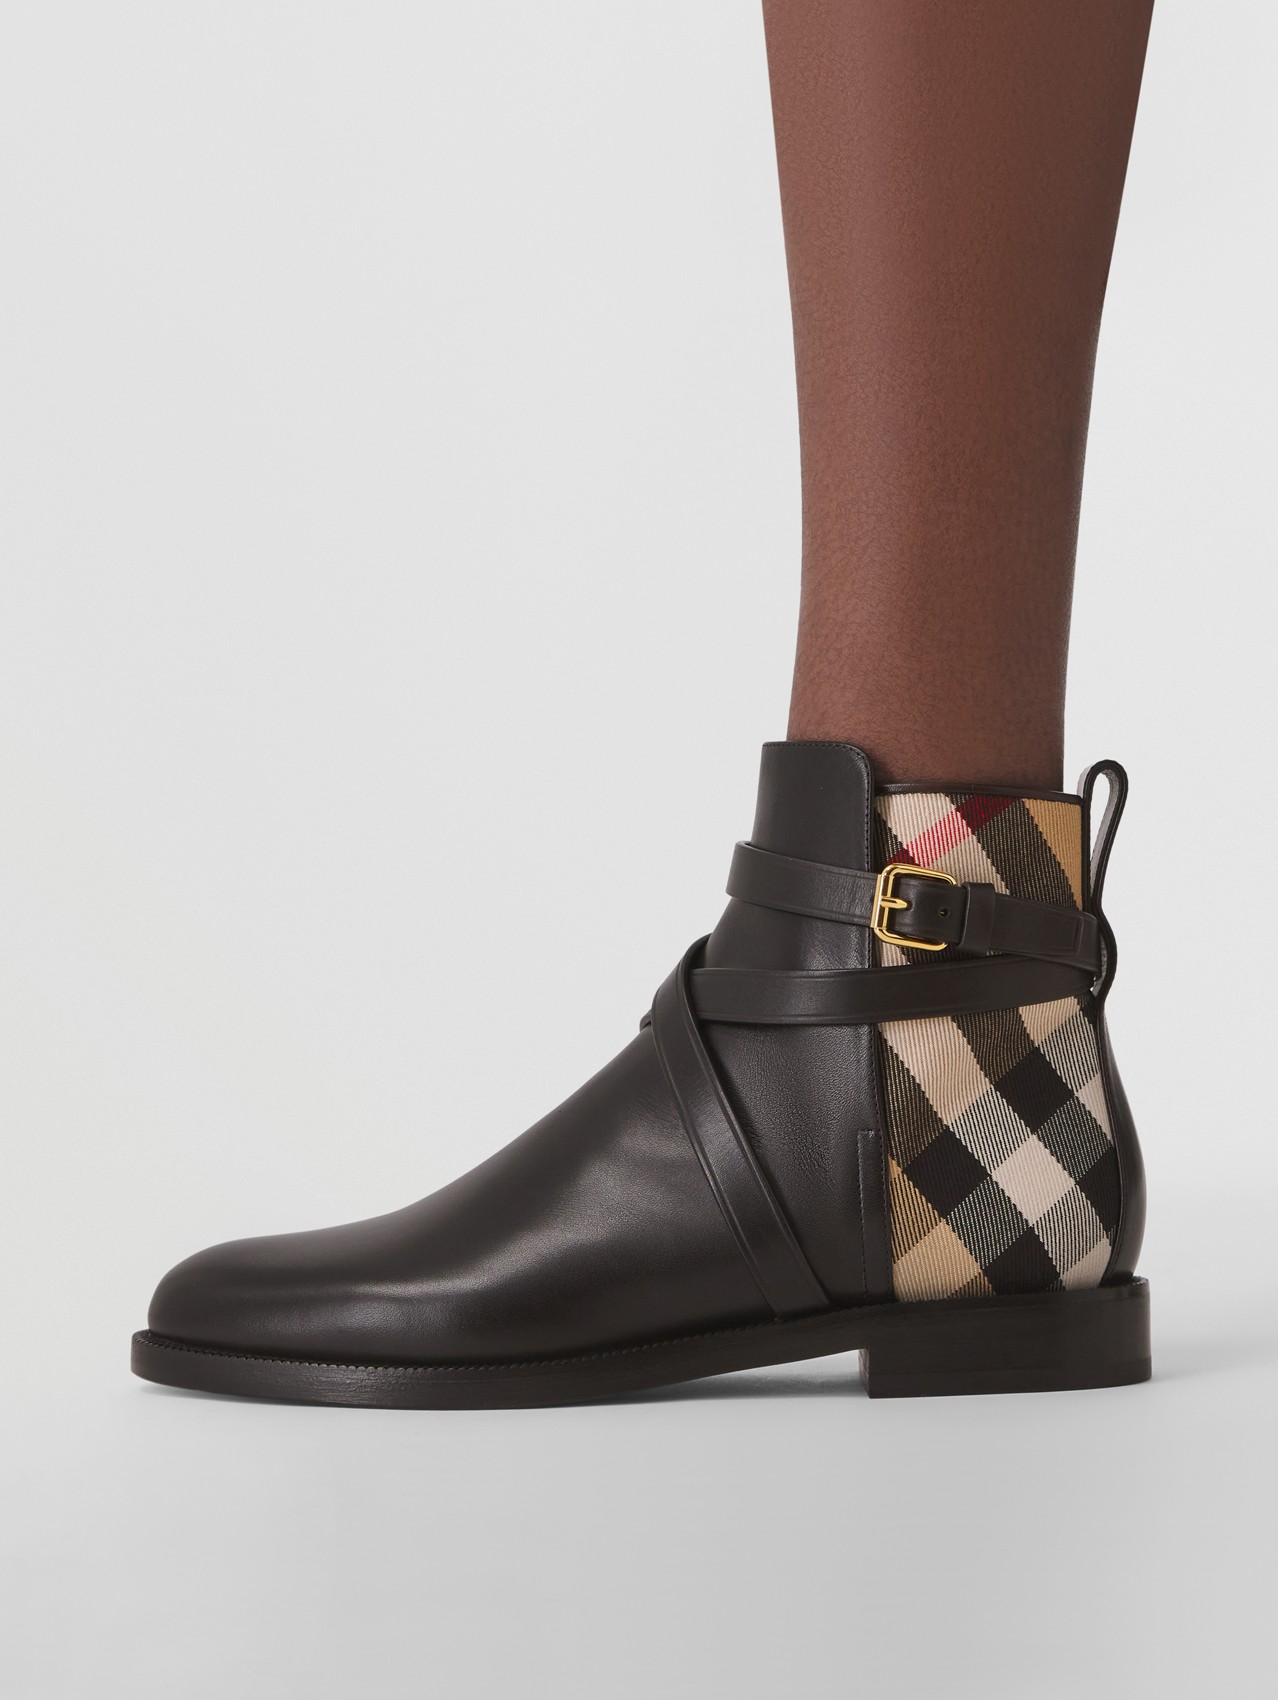 House Check and Leather Ankle Boots in Black/archive Beige